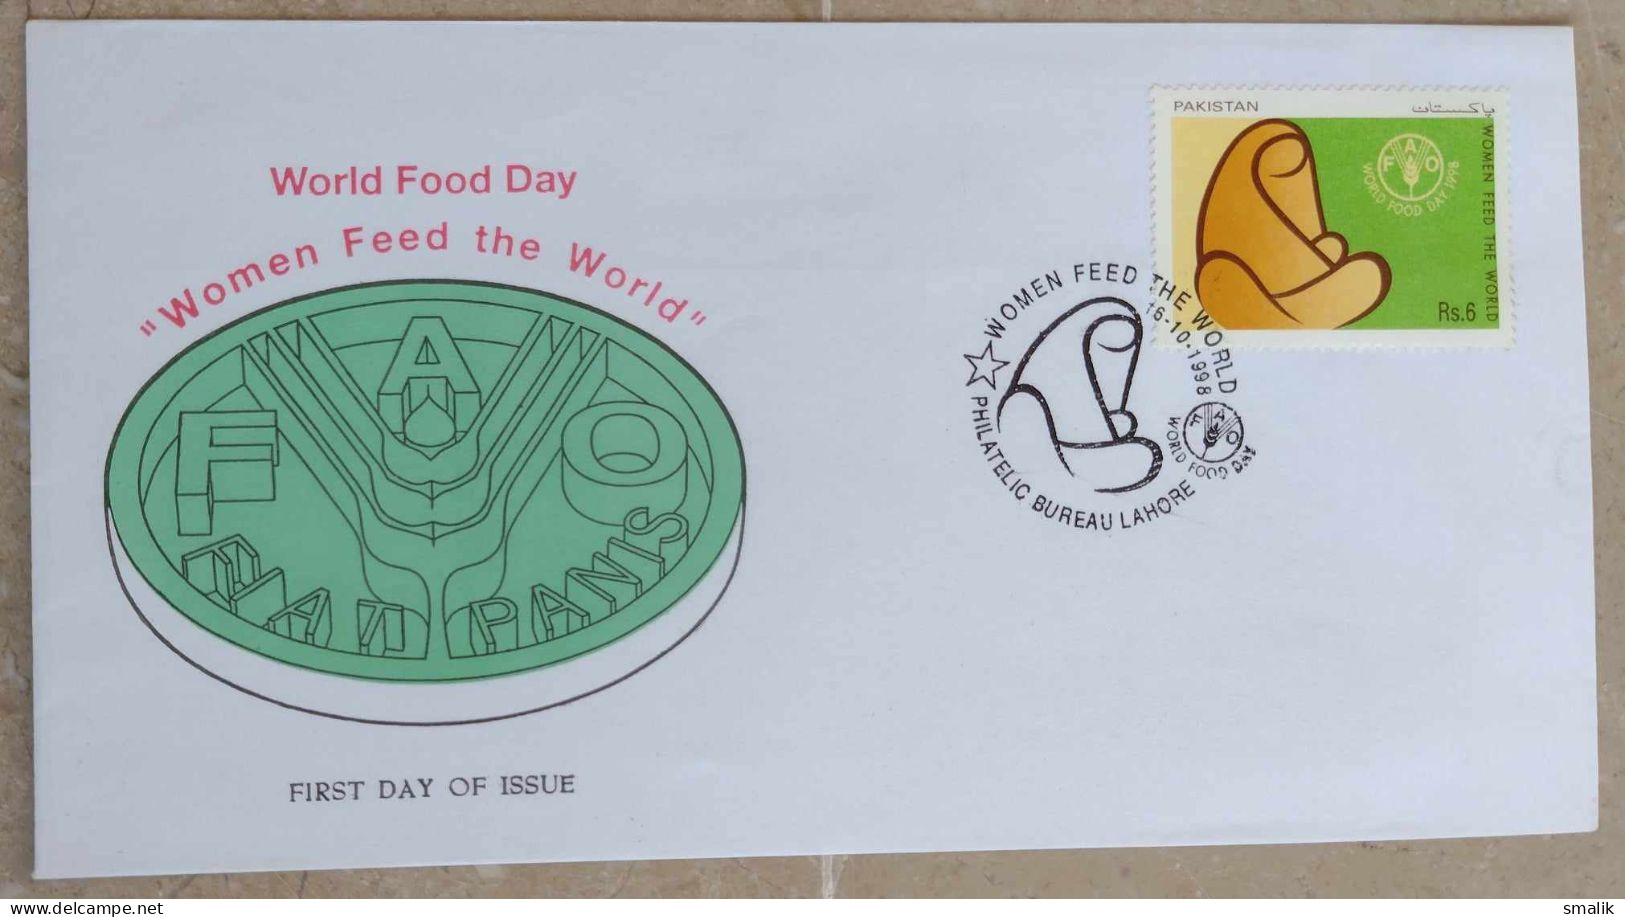 PAKISTAN 1998 FDC - FAO World FOOD Day, Women Feed The World, First Day Cover - Pakistan